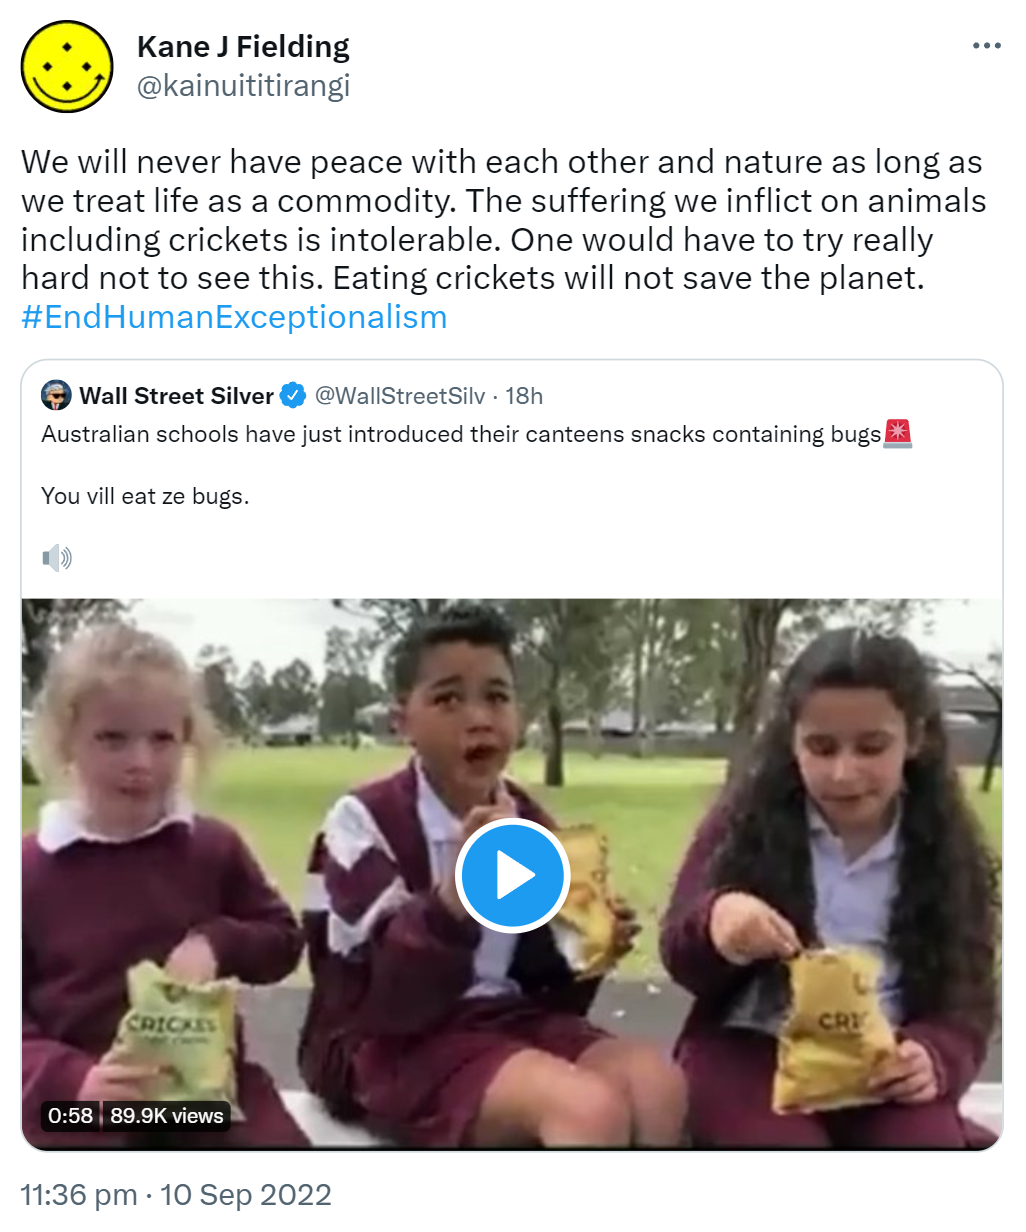 We will never have peace with each other and nature as long as we treat life as a commodity. The suffering we inflict on animals including crickets is intolerable. One would have to try really hard not to see this. Eating crickets will not save the planet. Hashtag End Human Exceptionalism. Quote Tweet. Wall Street Silver @WallStreetSilv. Australian schools have just introduced their canteens snacks containing bugs. You vill eat ze bugs. 11:36 pm · 10 Sep 2022.